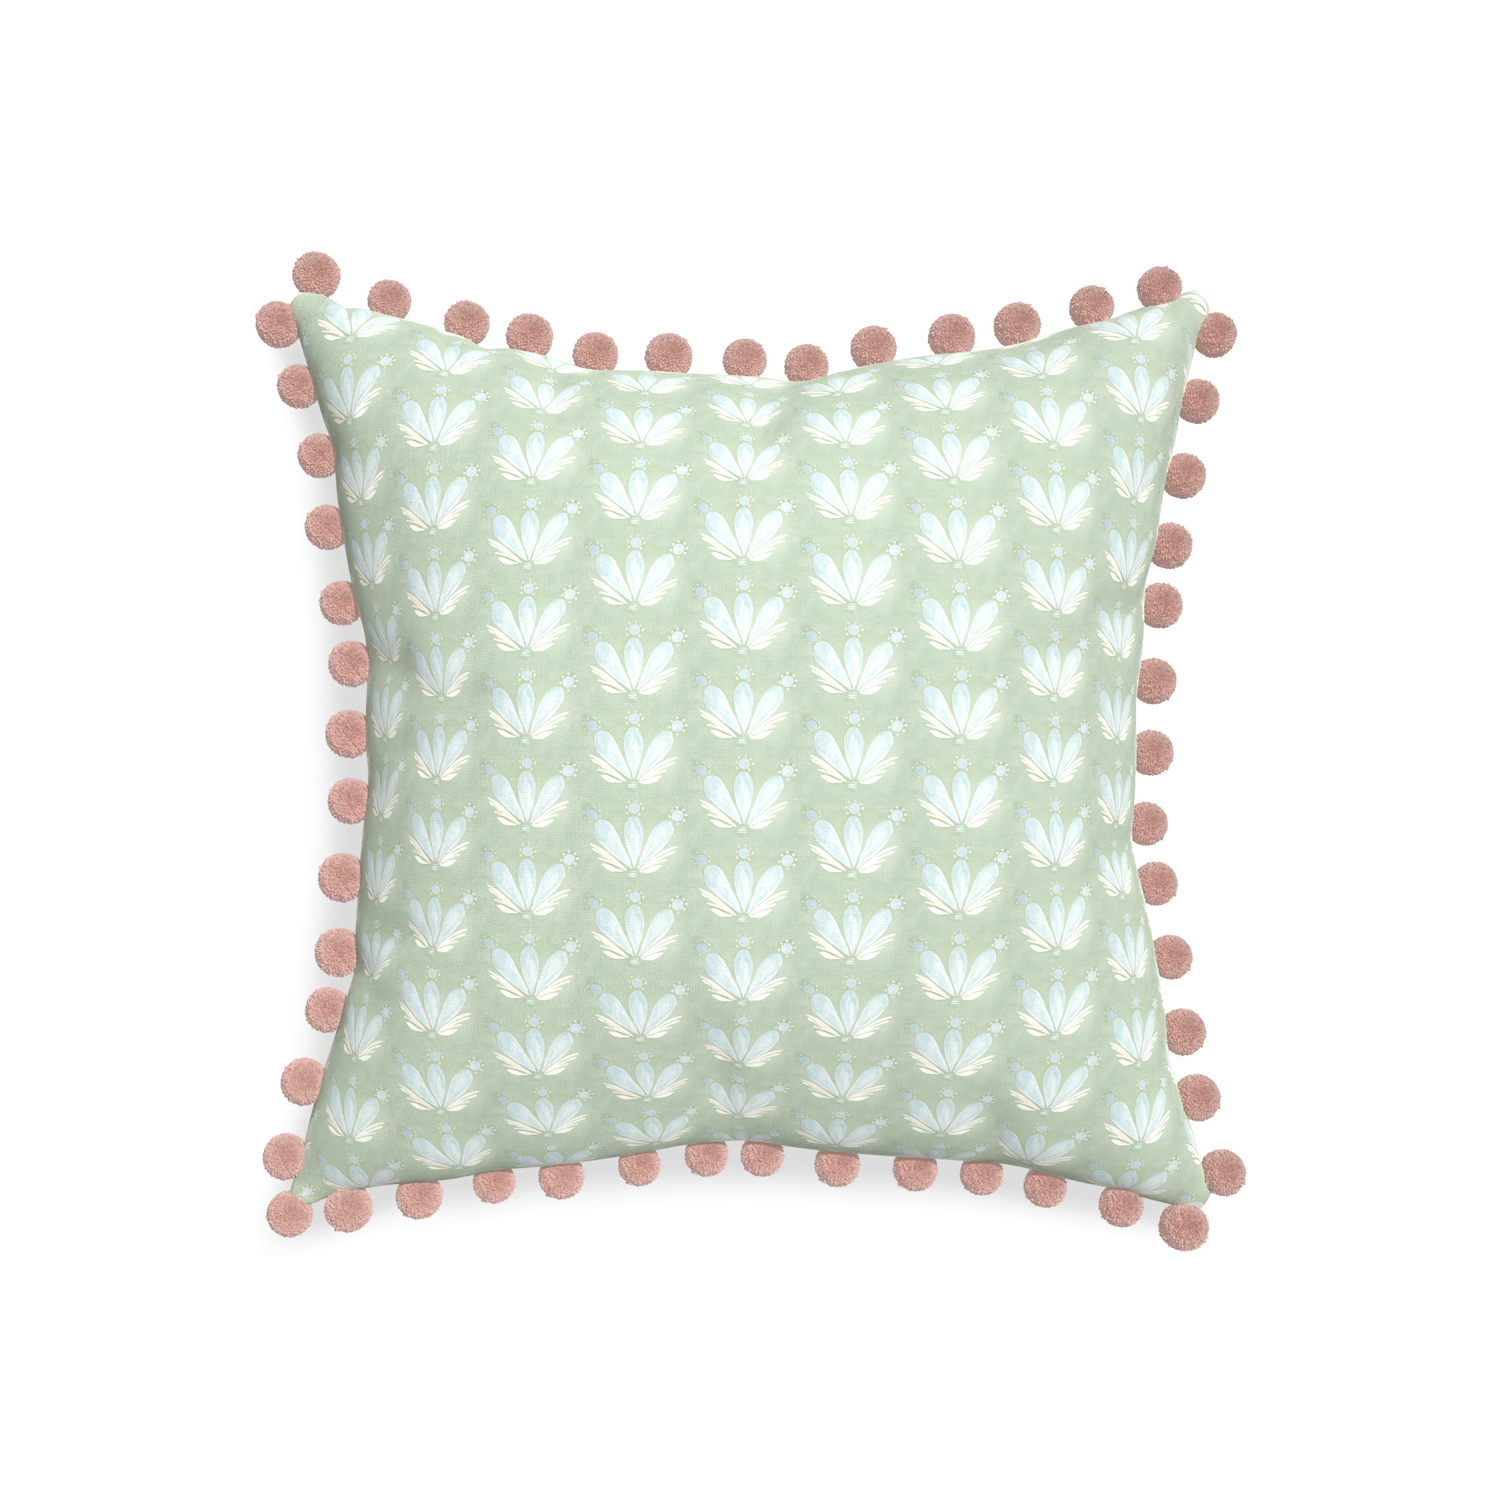 20-square serena sea salt custom blue & green floral drop repeatpillow with rose pom pom on white background